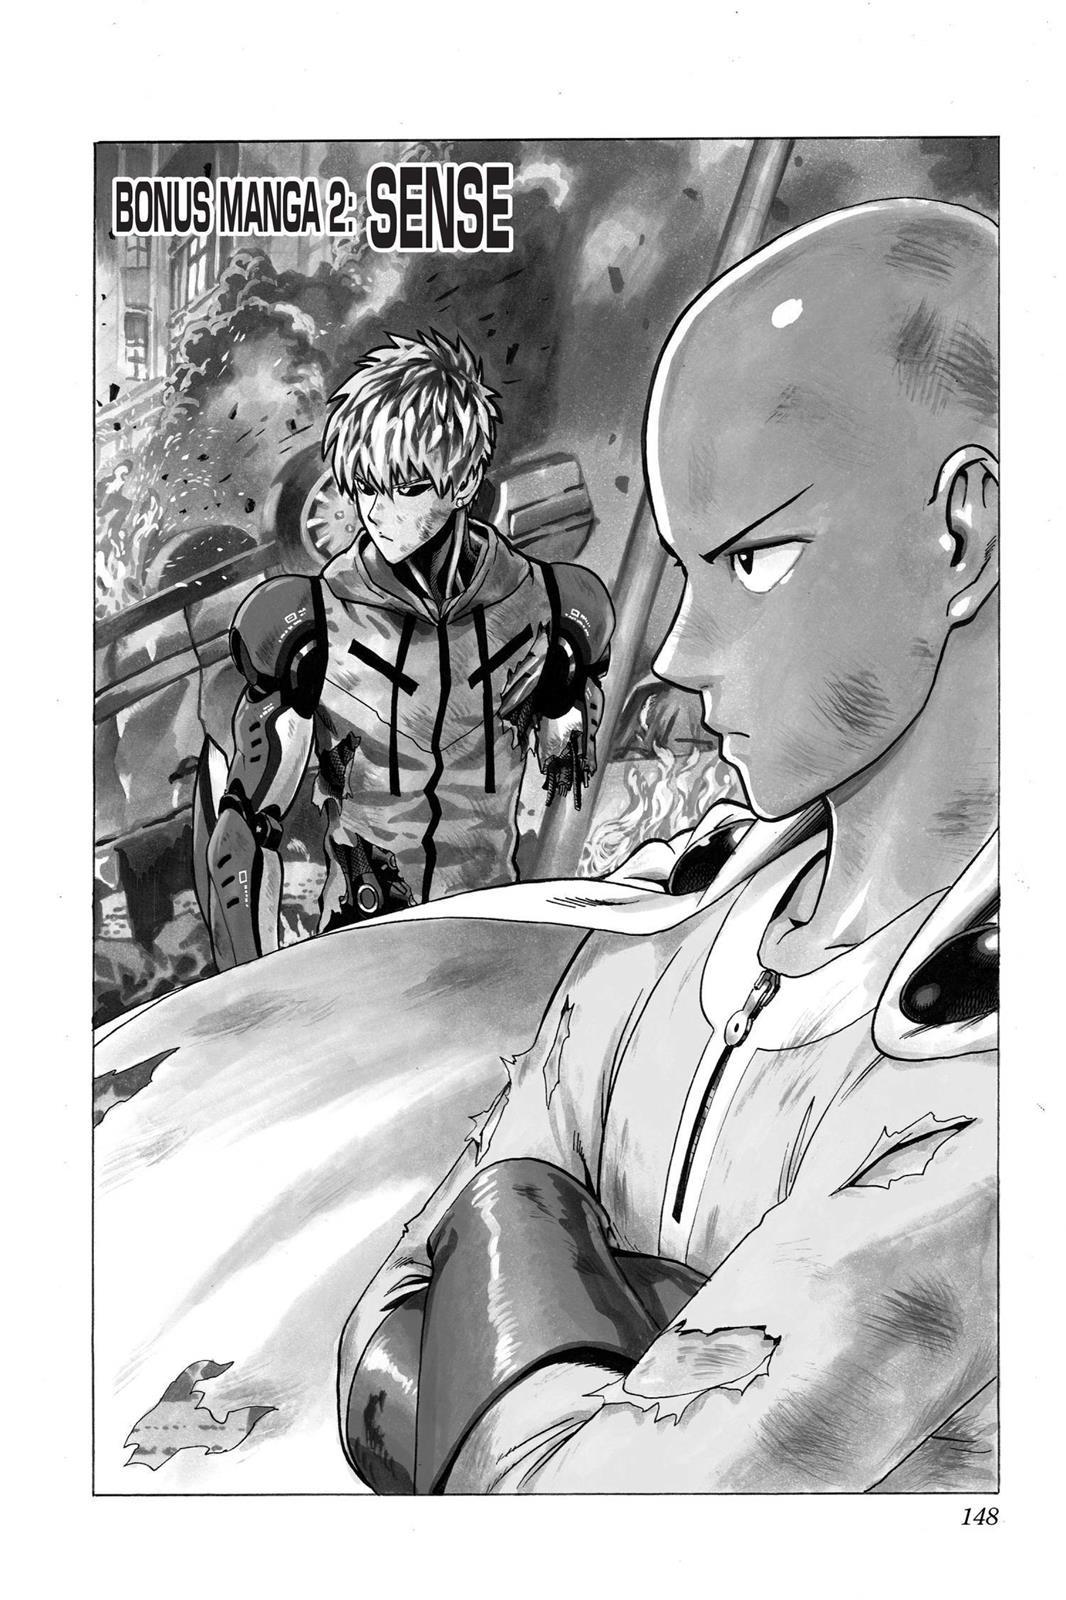 One-Punch Man, Chapter 55.2 - One-Punch Man Manga Online